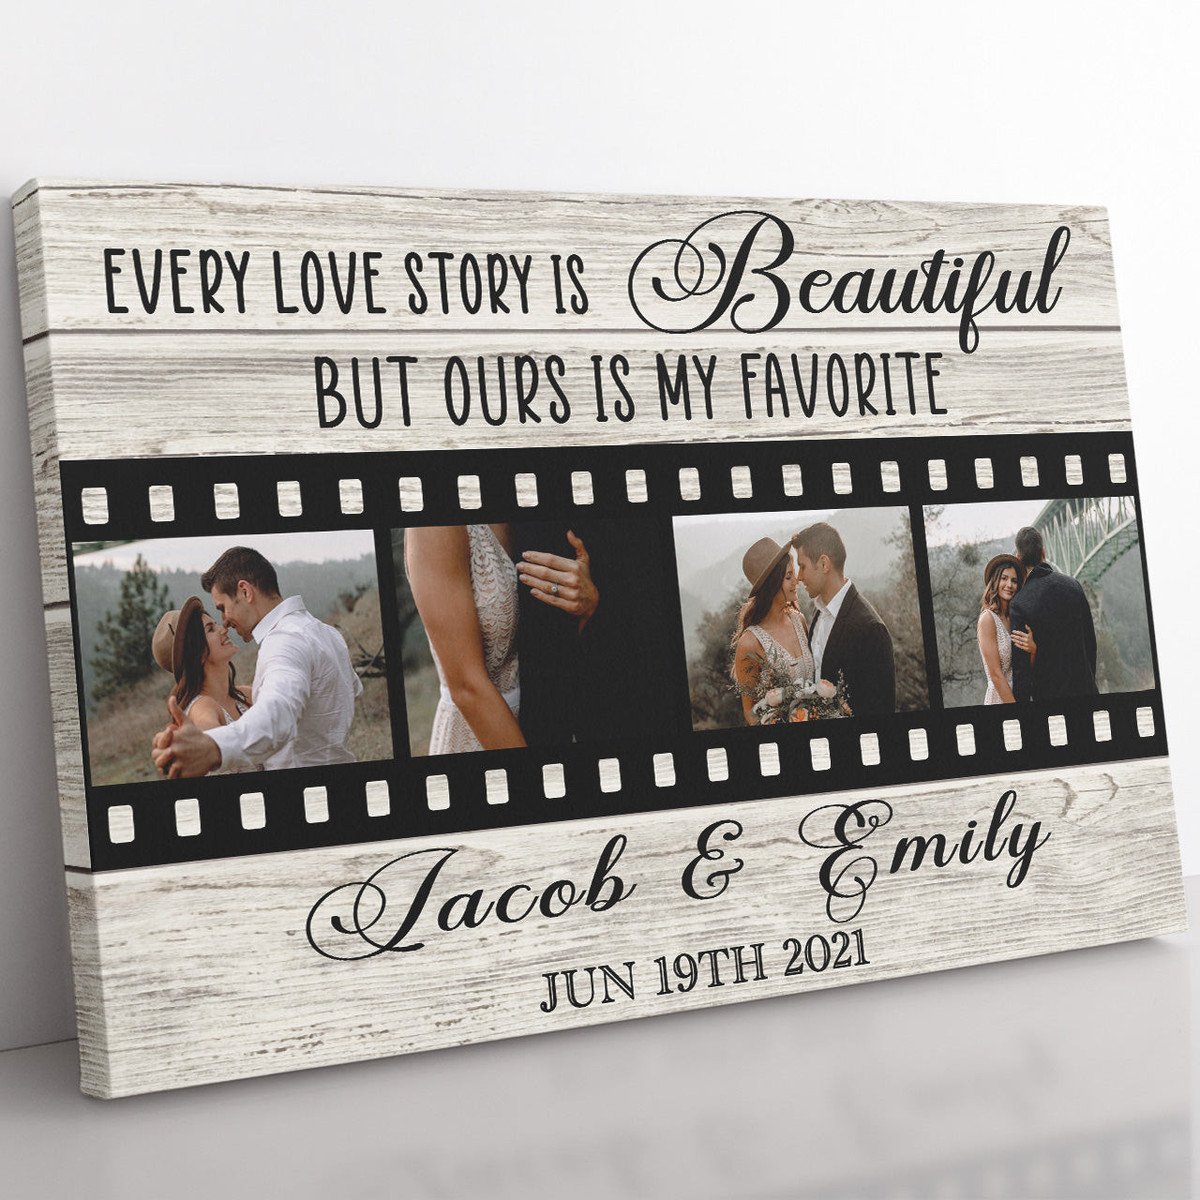 Personalized Canvas Painting, Canvas Hanging Gift For Husband, Every Love Story Is Beautiful Our Is My Favorite Framed Prints, Canvas Paintings Wrapped Canvas 8x10